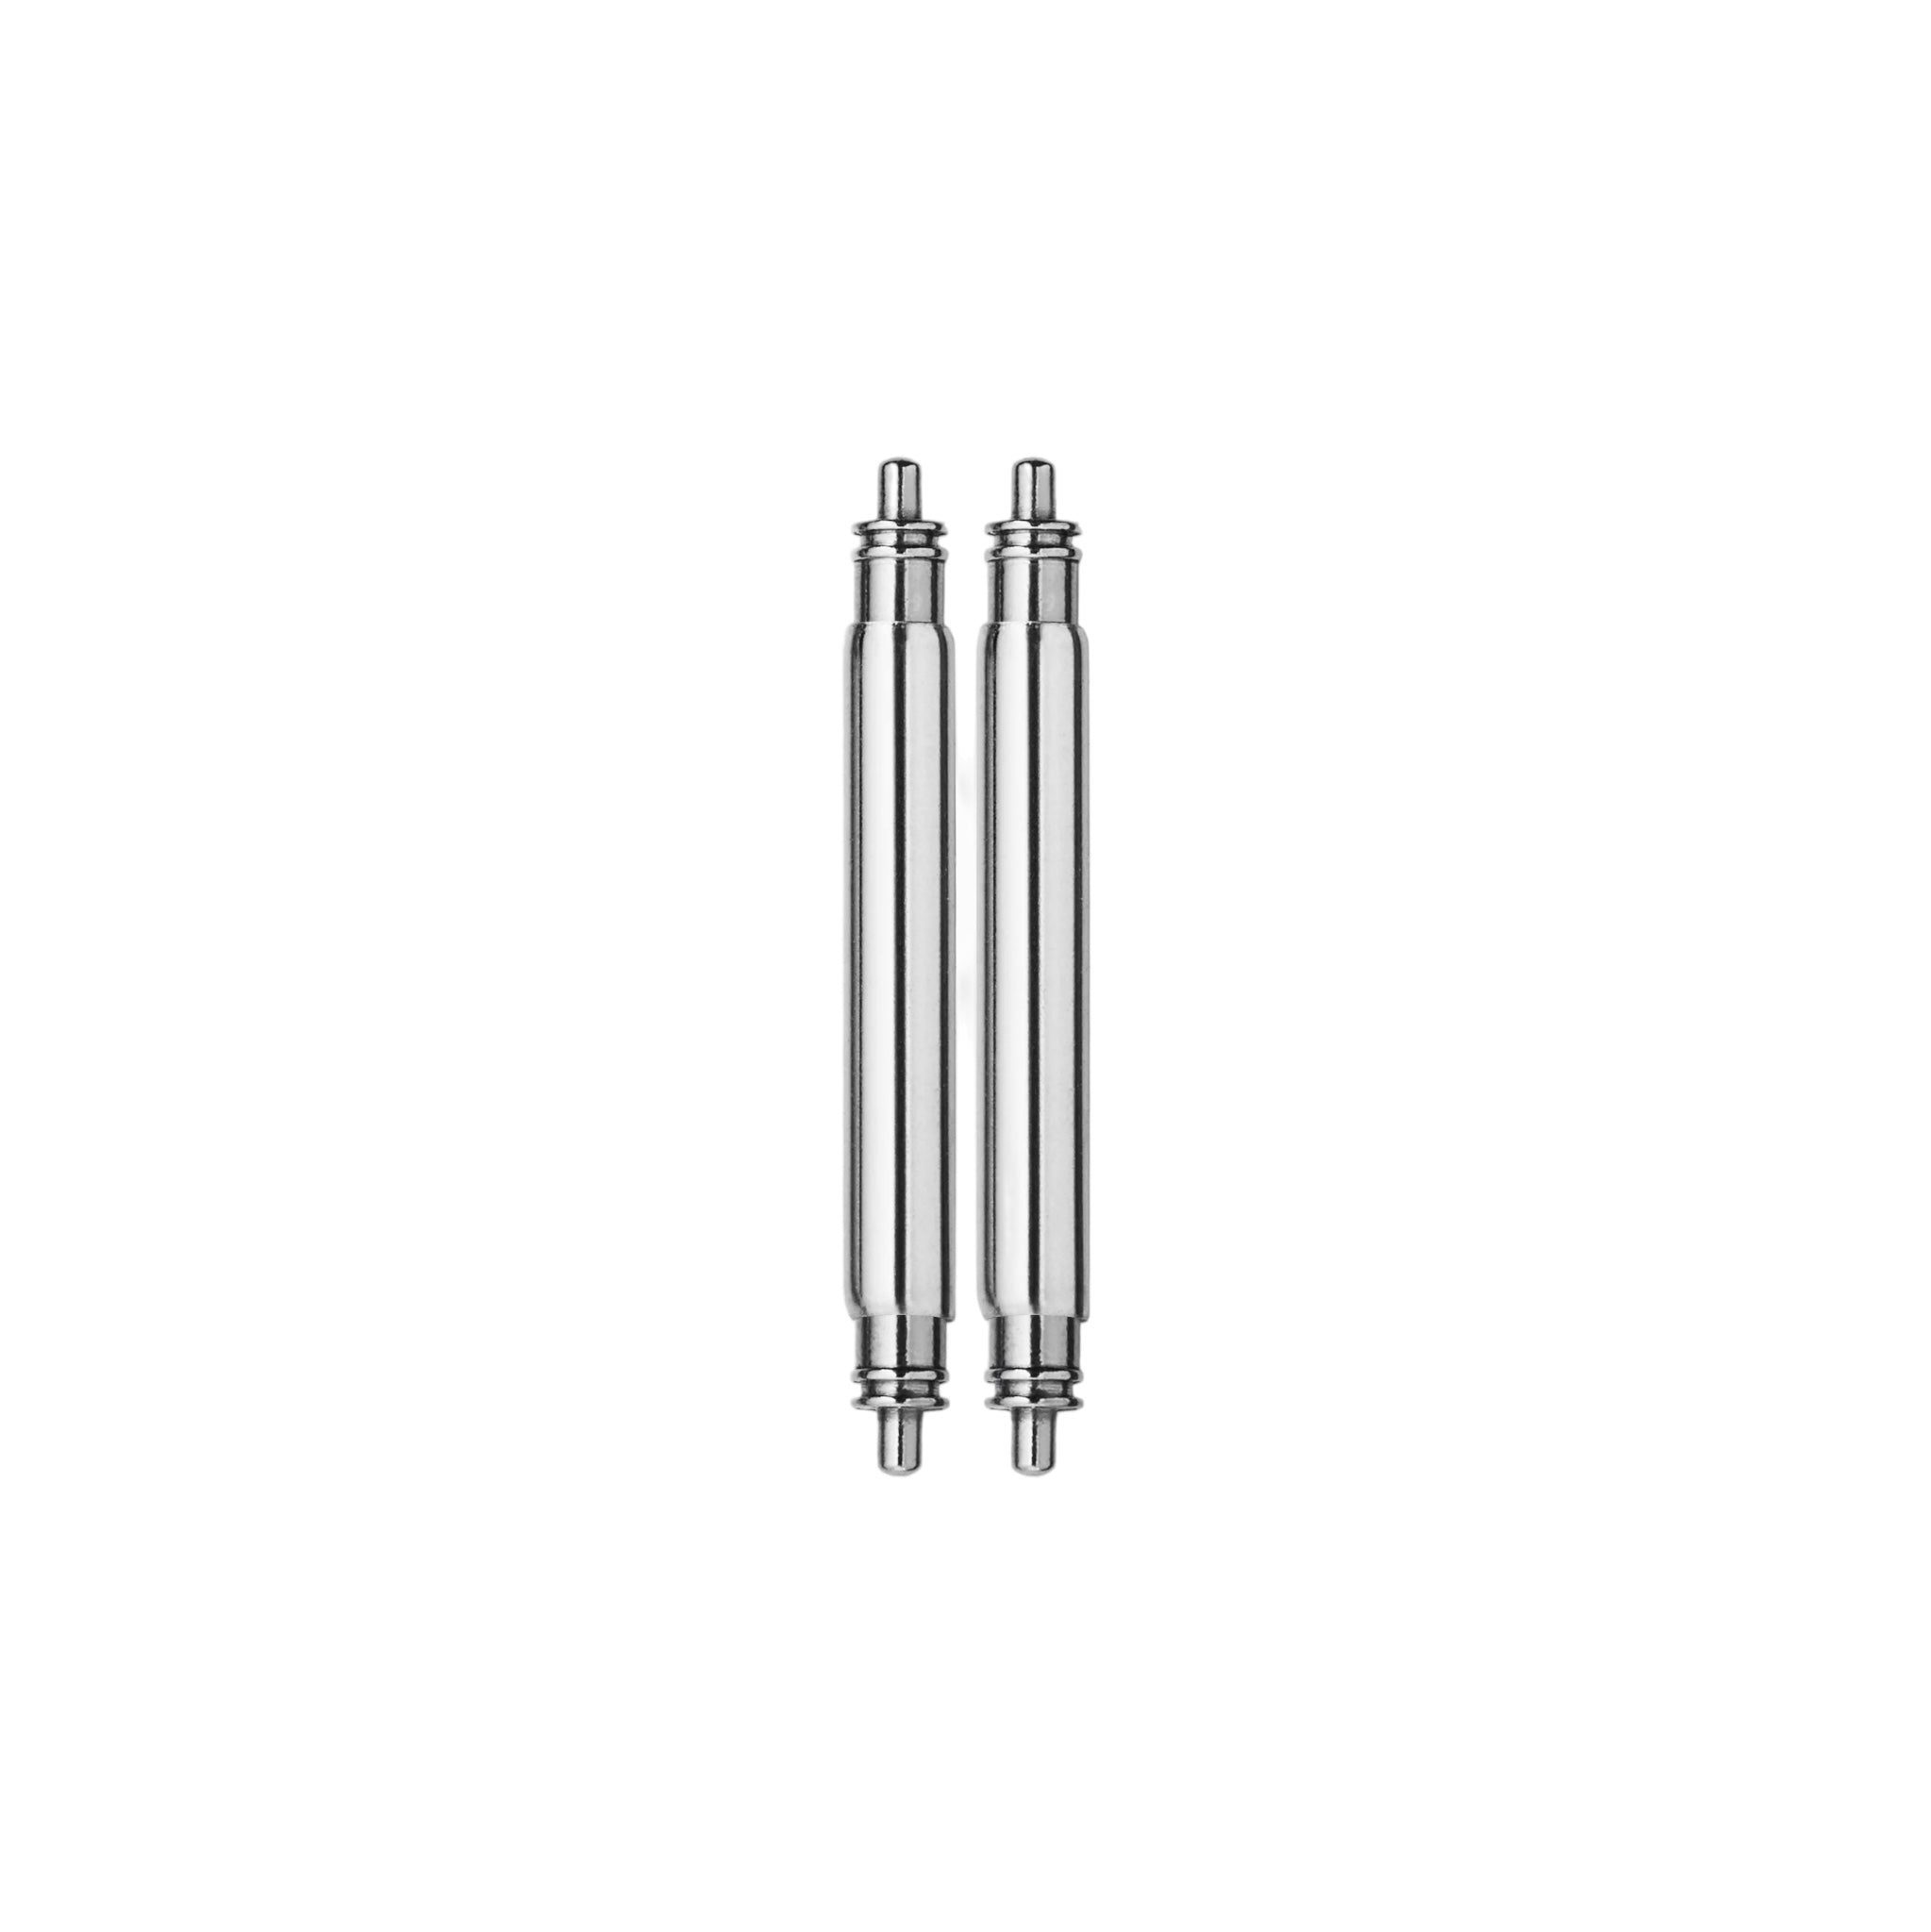 2.5mm 'Fat' Spring Bars - Pack of 2